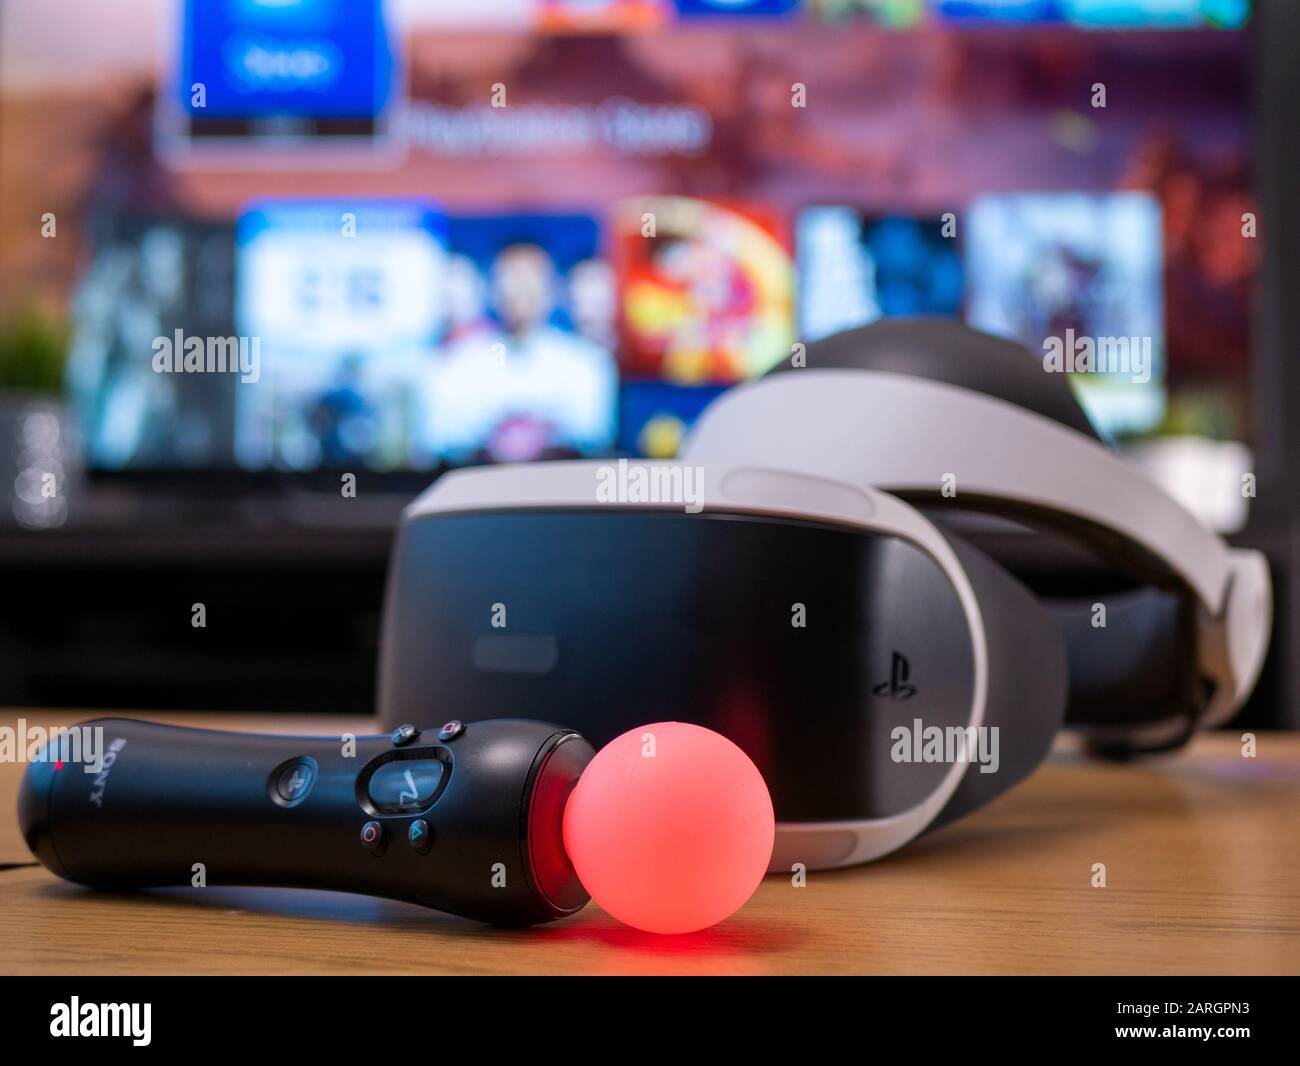 UK, Jan 2020: Sony Playstation VR virtual reality headset and move wireless  controller for gaming Stock Photo - Alamy